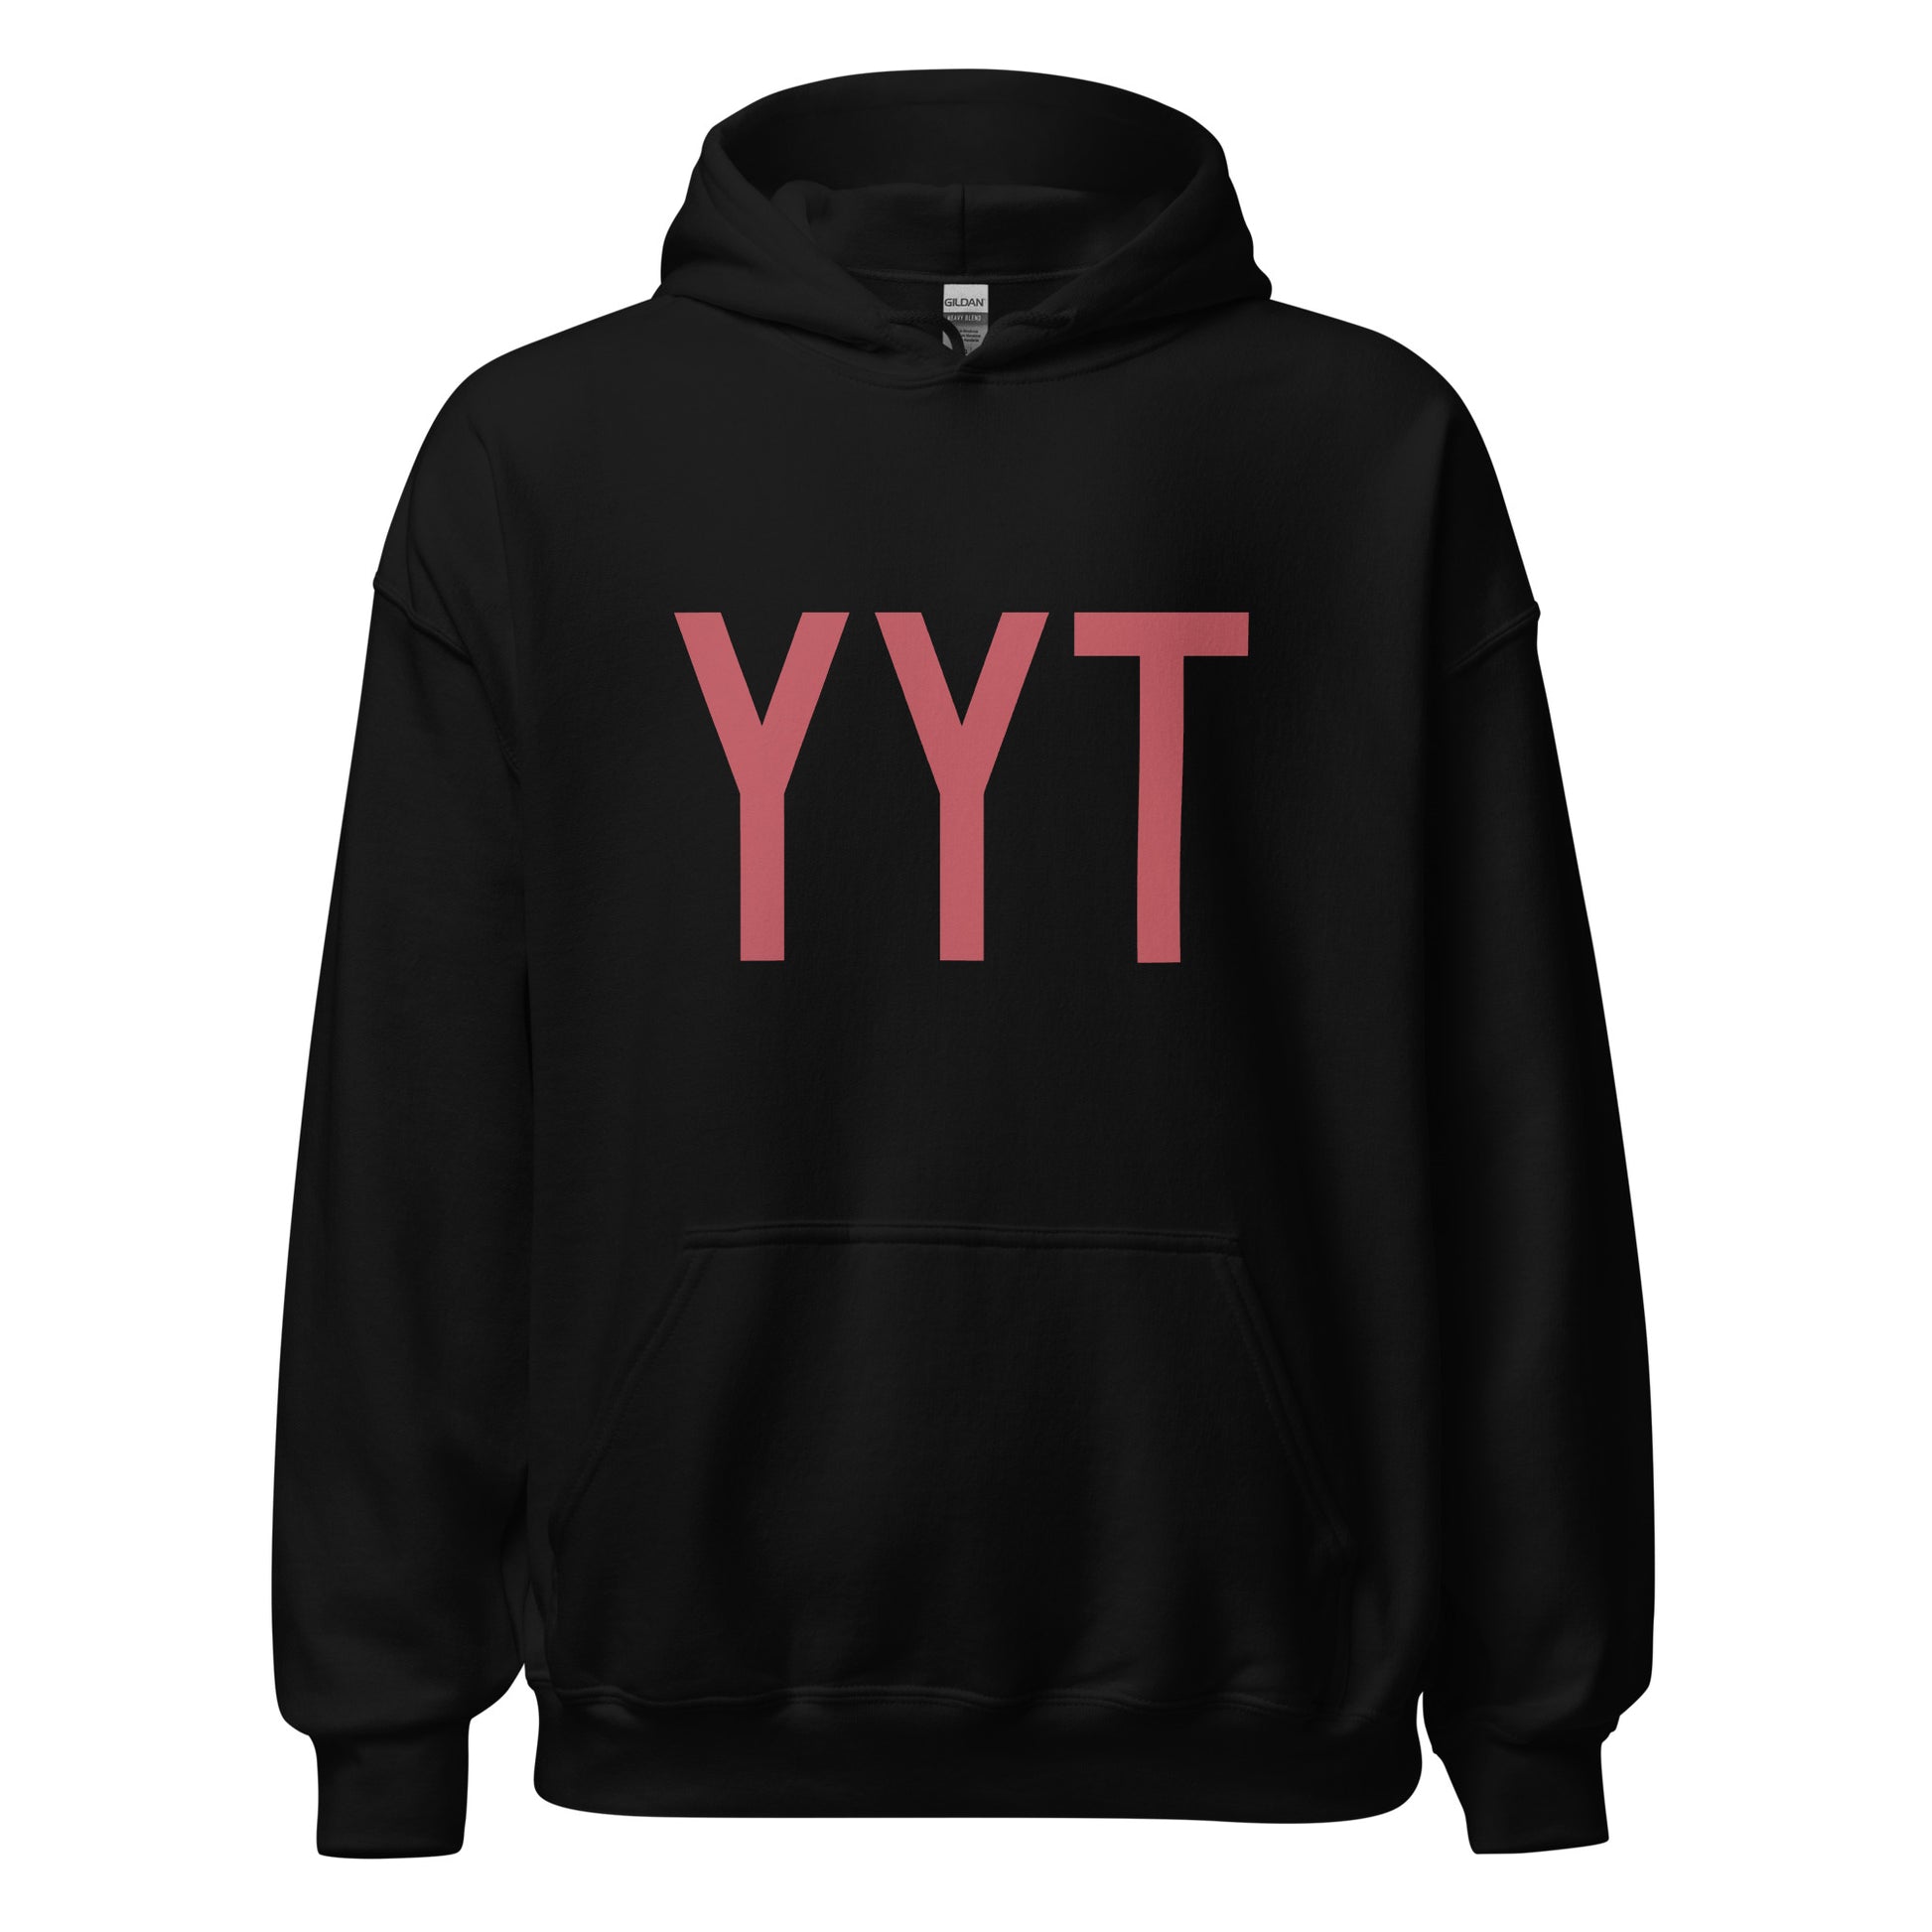 Aviation Enthusiast Hoodie - Deep Pink Graphic • YYT St. John's • YHM Designs - Image 03